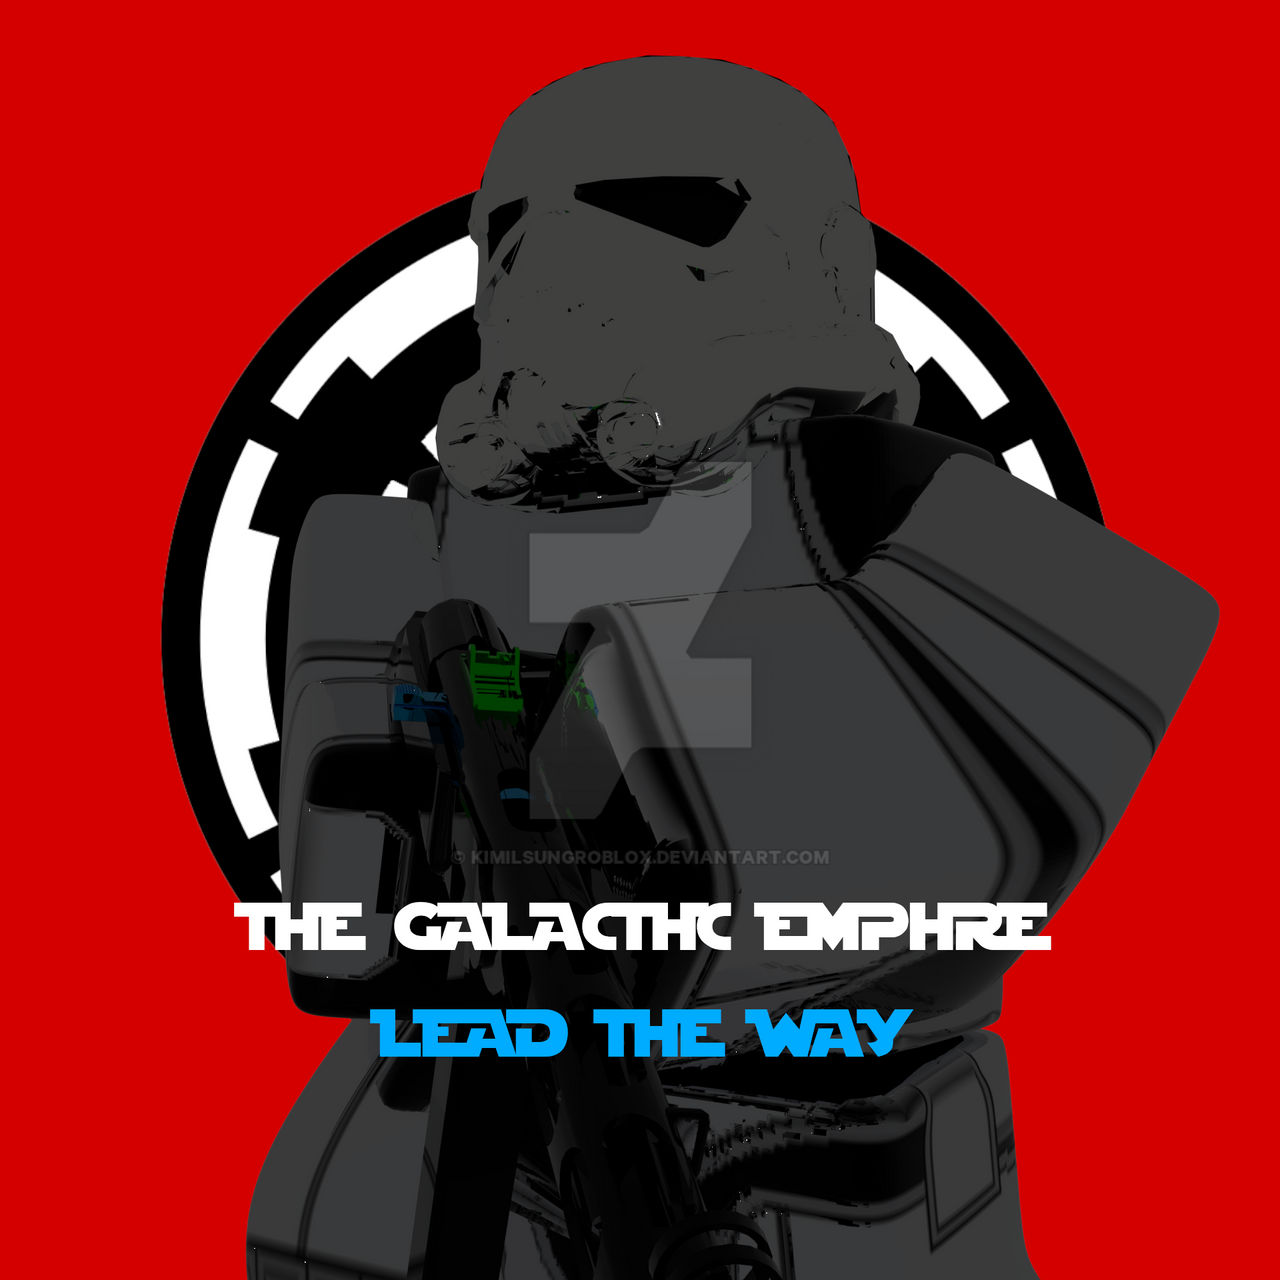 The Galactic Empire By Kimilsungroblox On Deviantart - the galactic empire roblox logo